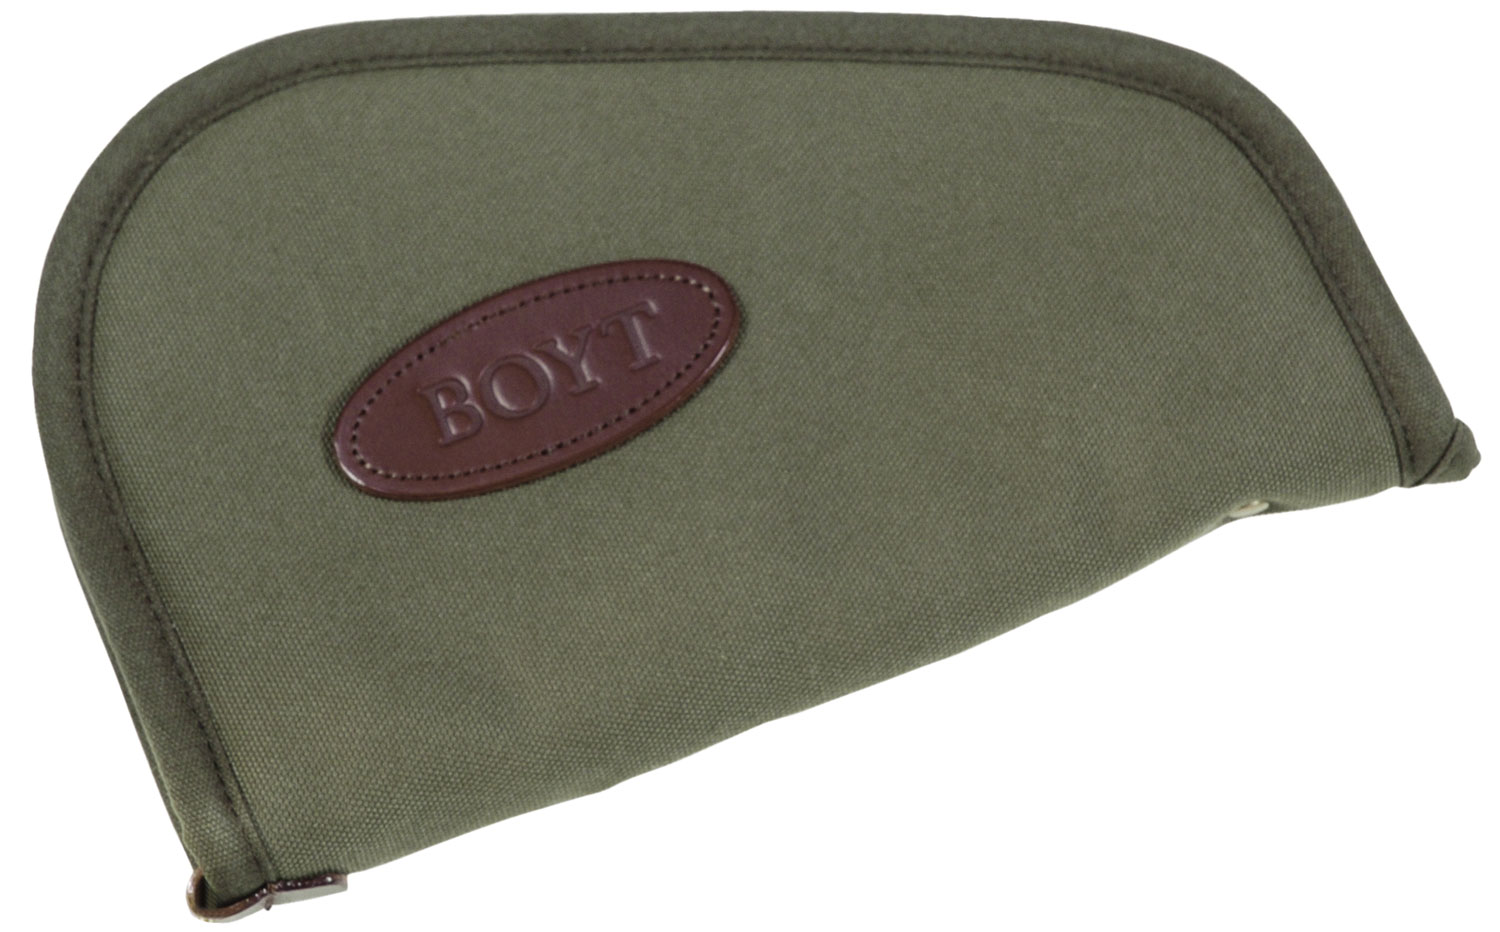 Boyt Harness 0PP600009 Heart-Shaped Pistol Rug made of Waxed Canvas with OD Green Finish, Quilted Flannel Lining, Full Length Zipper & Padding 8